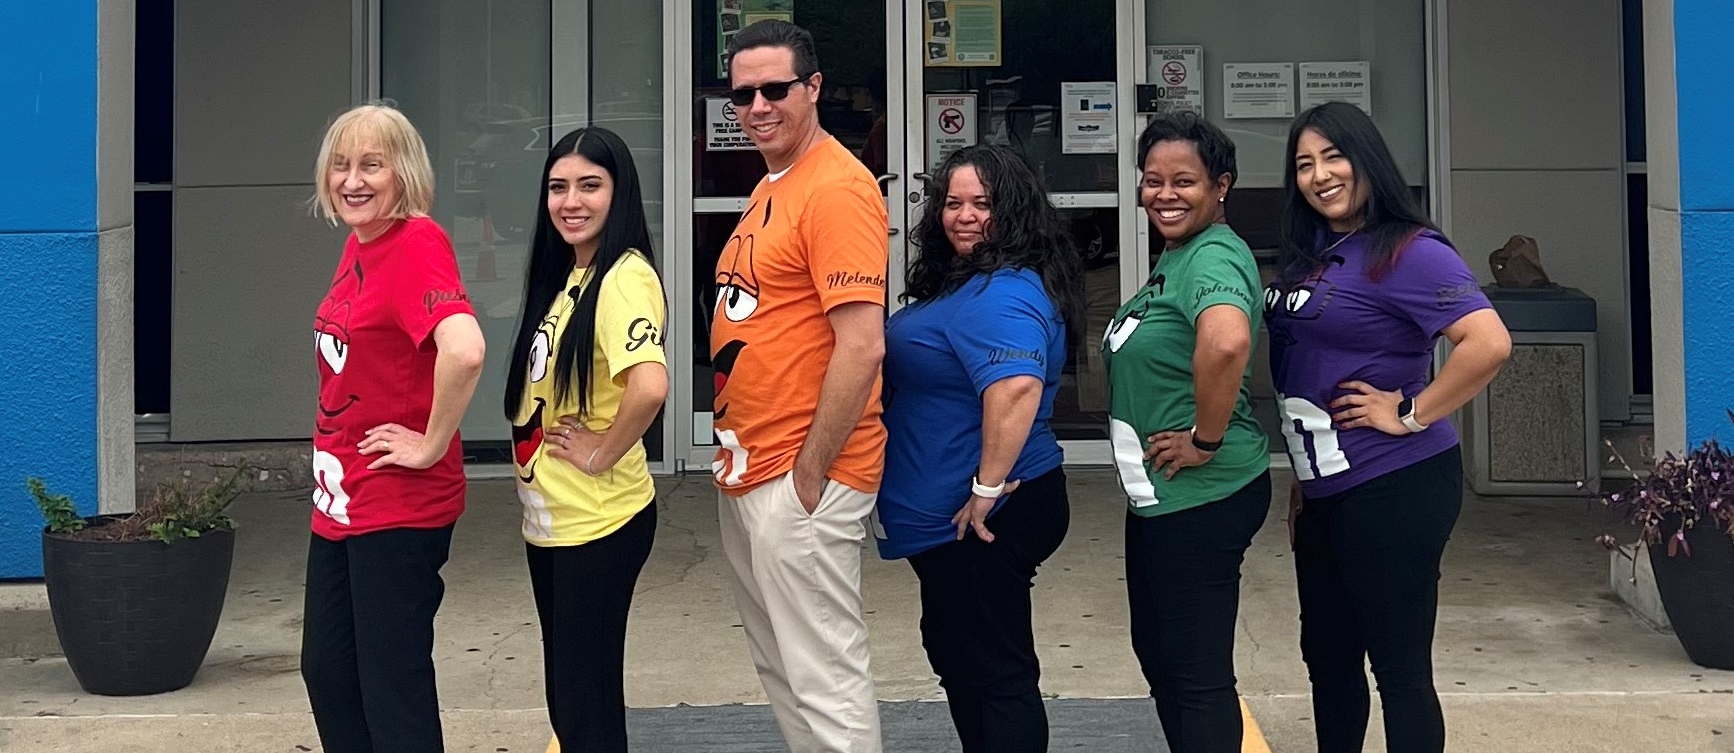 Ms. Pasic, Ms. Gil, Mr. Melendez, Ms. Wendy, Ms. Johnson, and Ms. Stefany all lined up for the M&M STAAR Benchmark Performance Photo Shoot